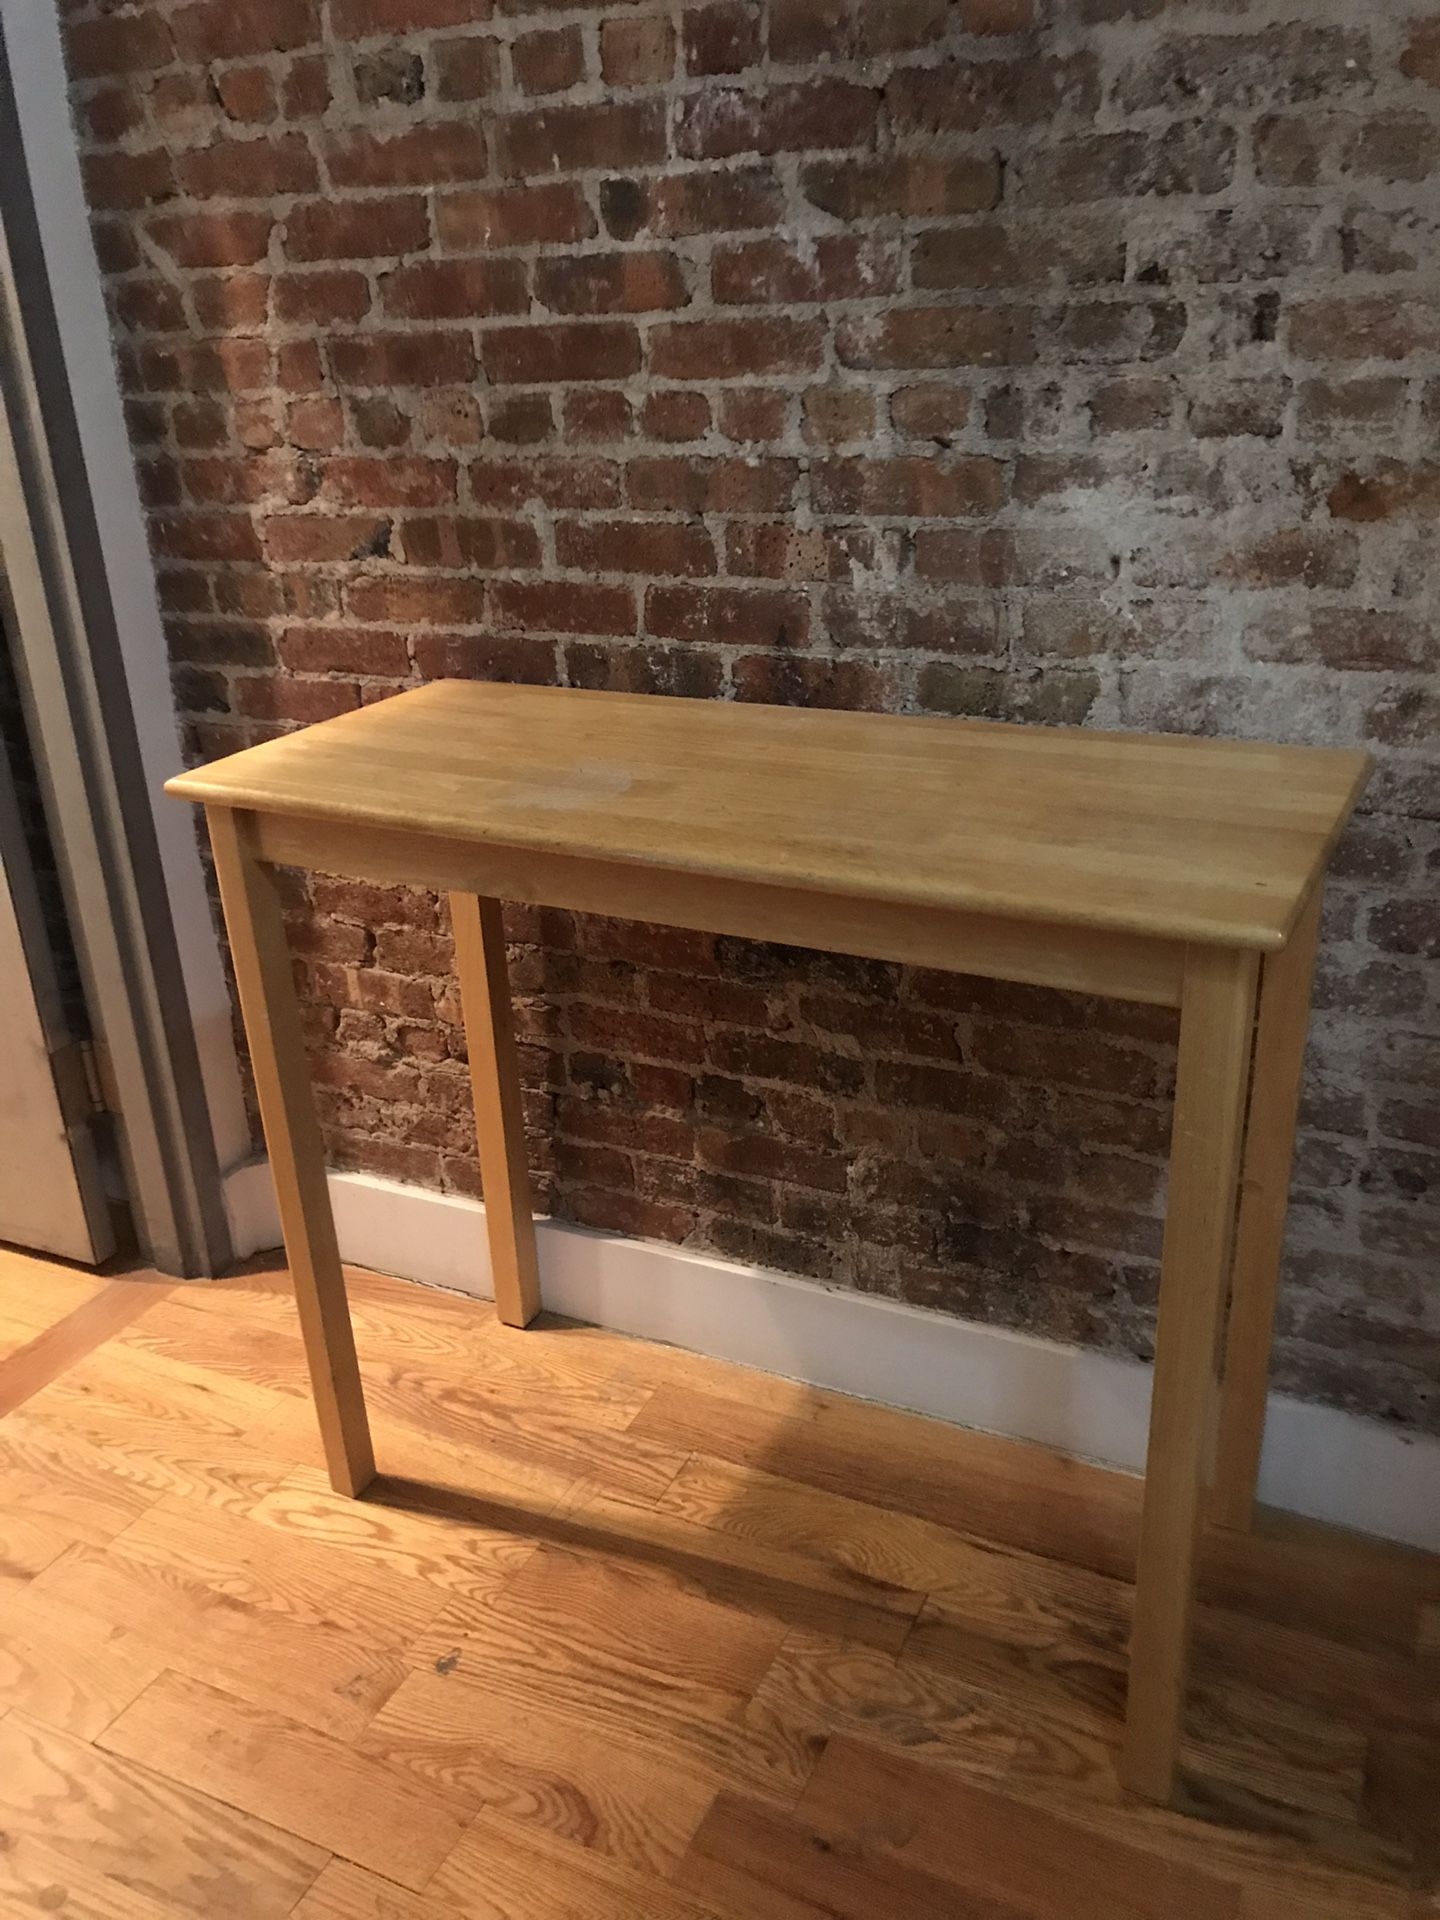 PERFECT TALL TABLE!!